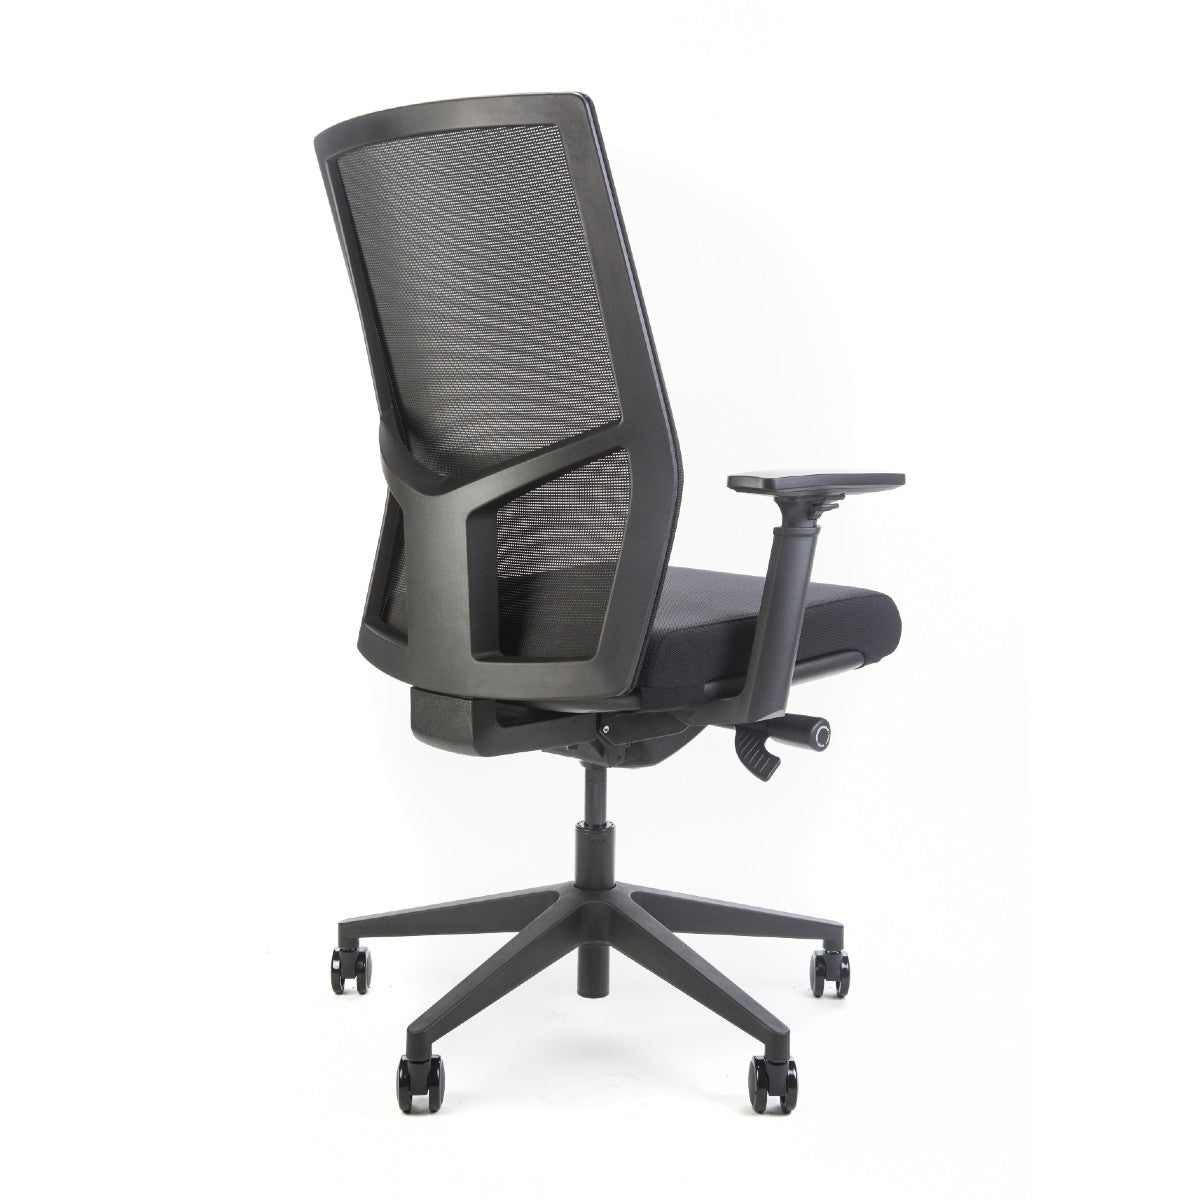 Dropship High Back Office Chair, Adjustable Ergonomic Office Chair